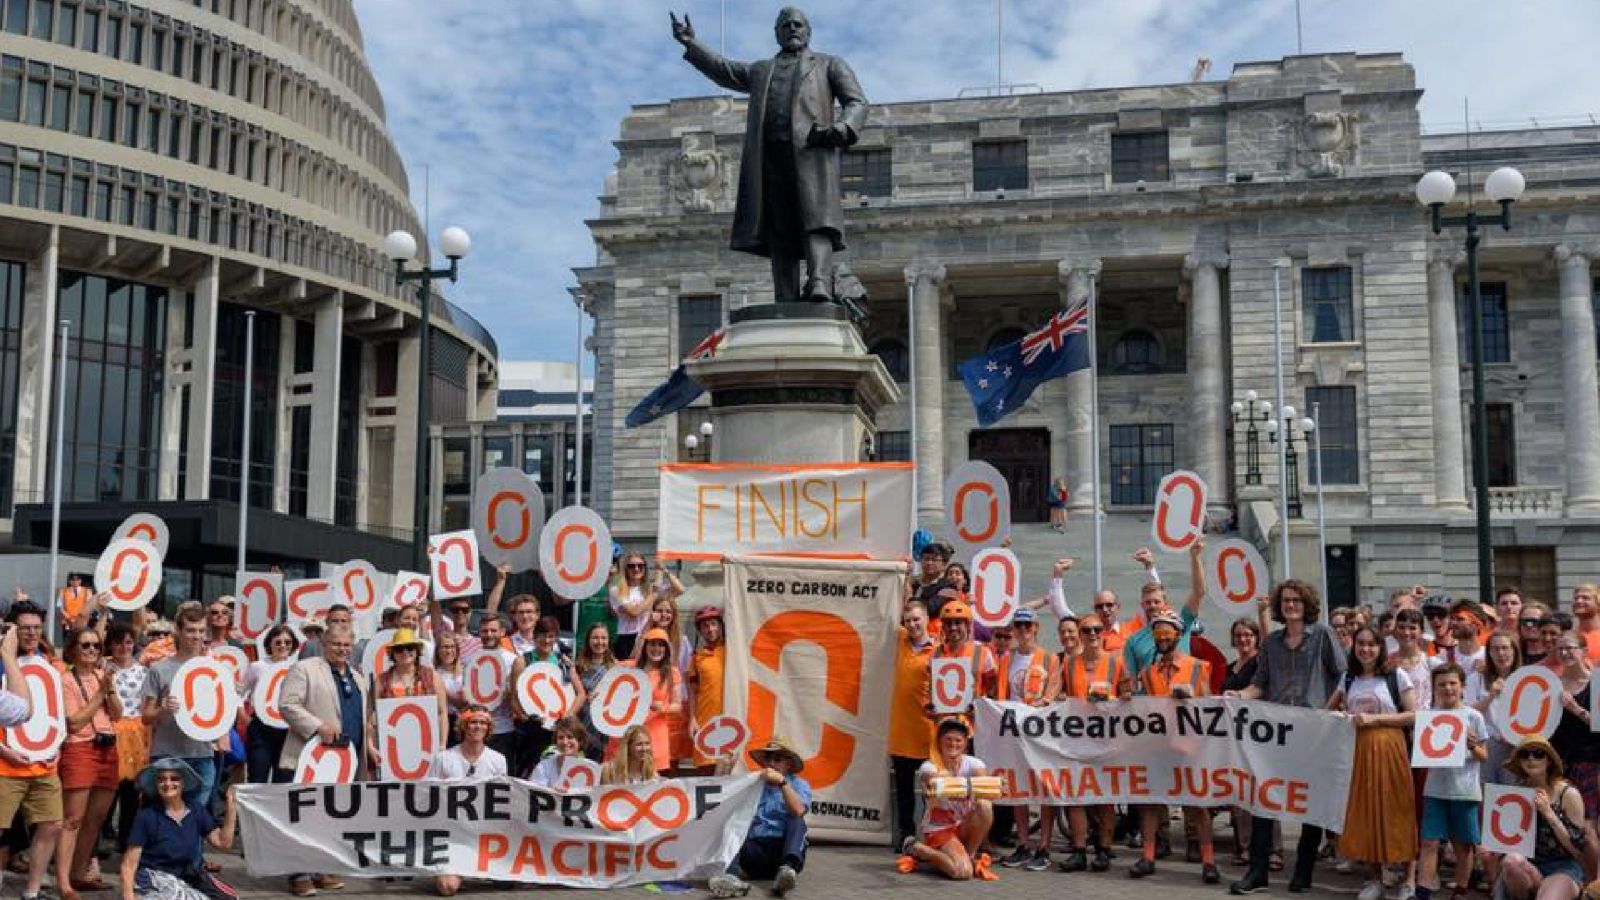 Large group of students holding orange '0' signs and banners saying 'Future proof the Pacific' and 'Aotearoa NZ for climate justice', with the Beehive and the statue of Richard Seddon in the background.